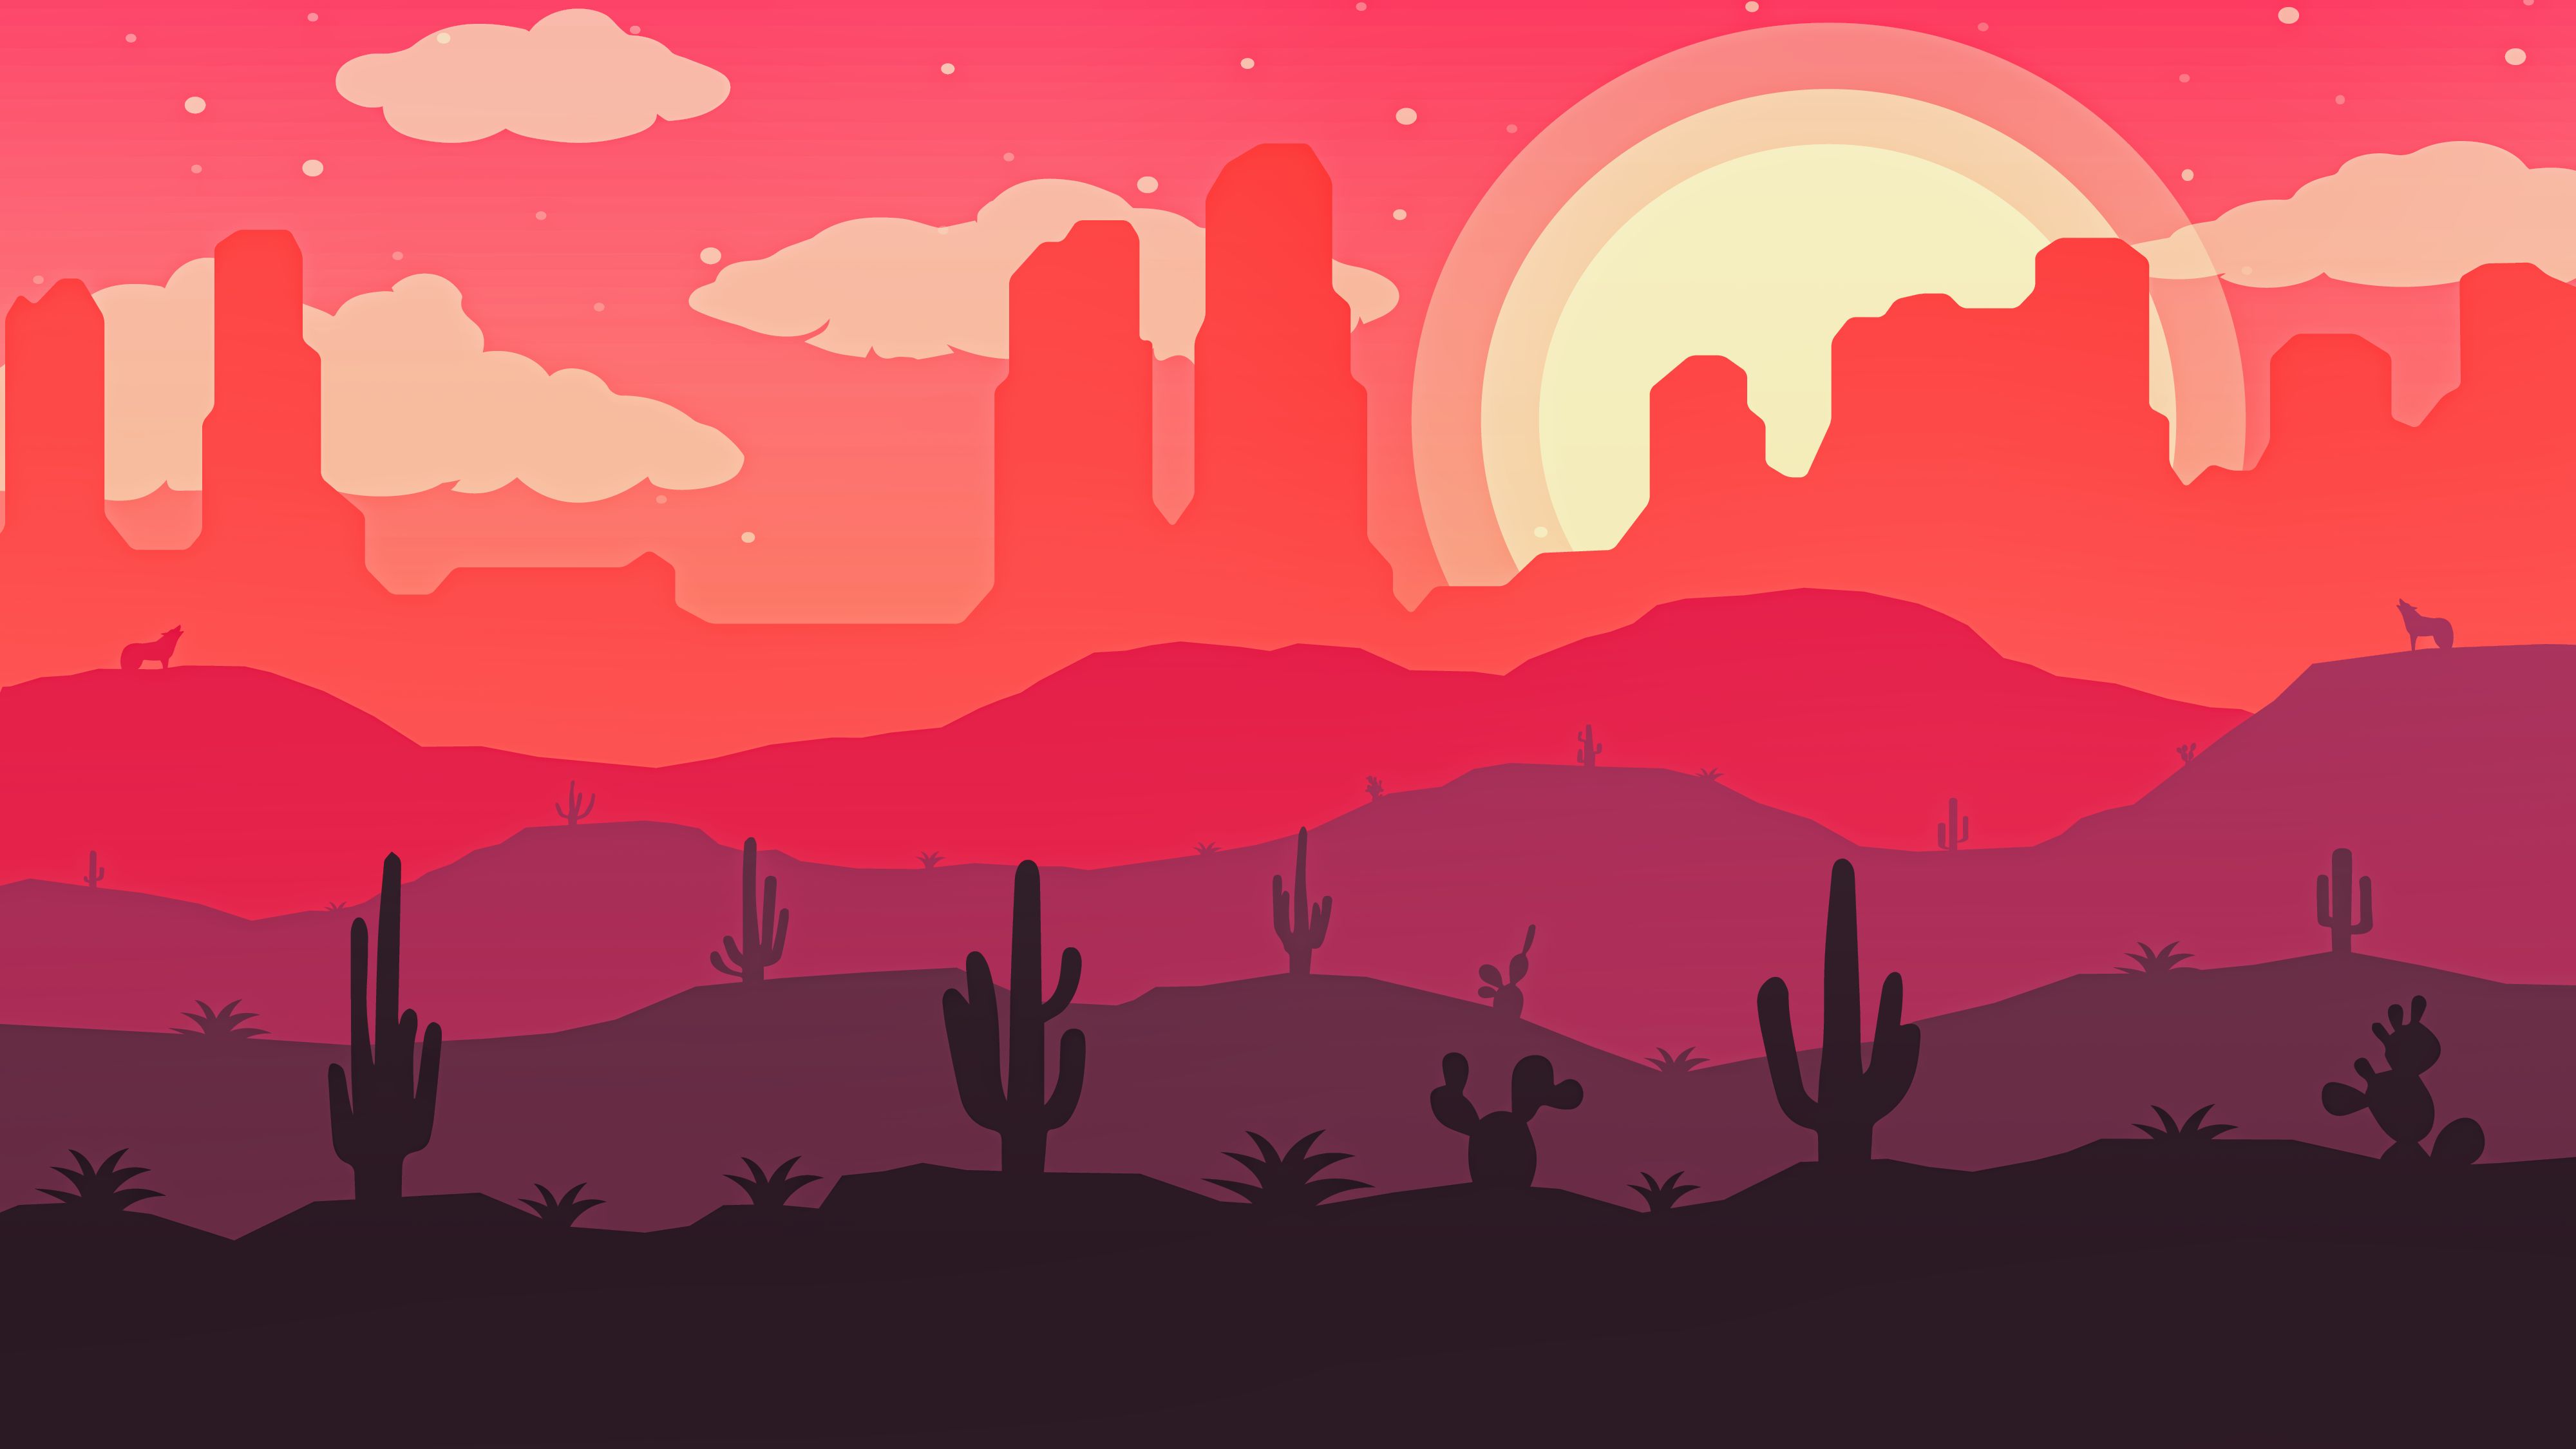 1080p pic wolf, cactuses, sun, vector